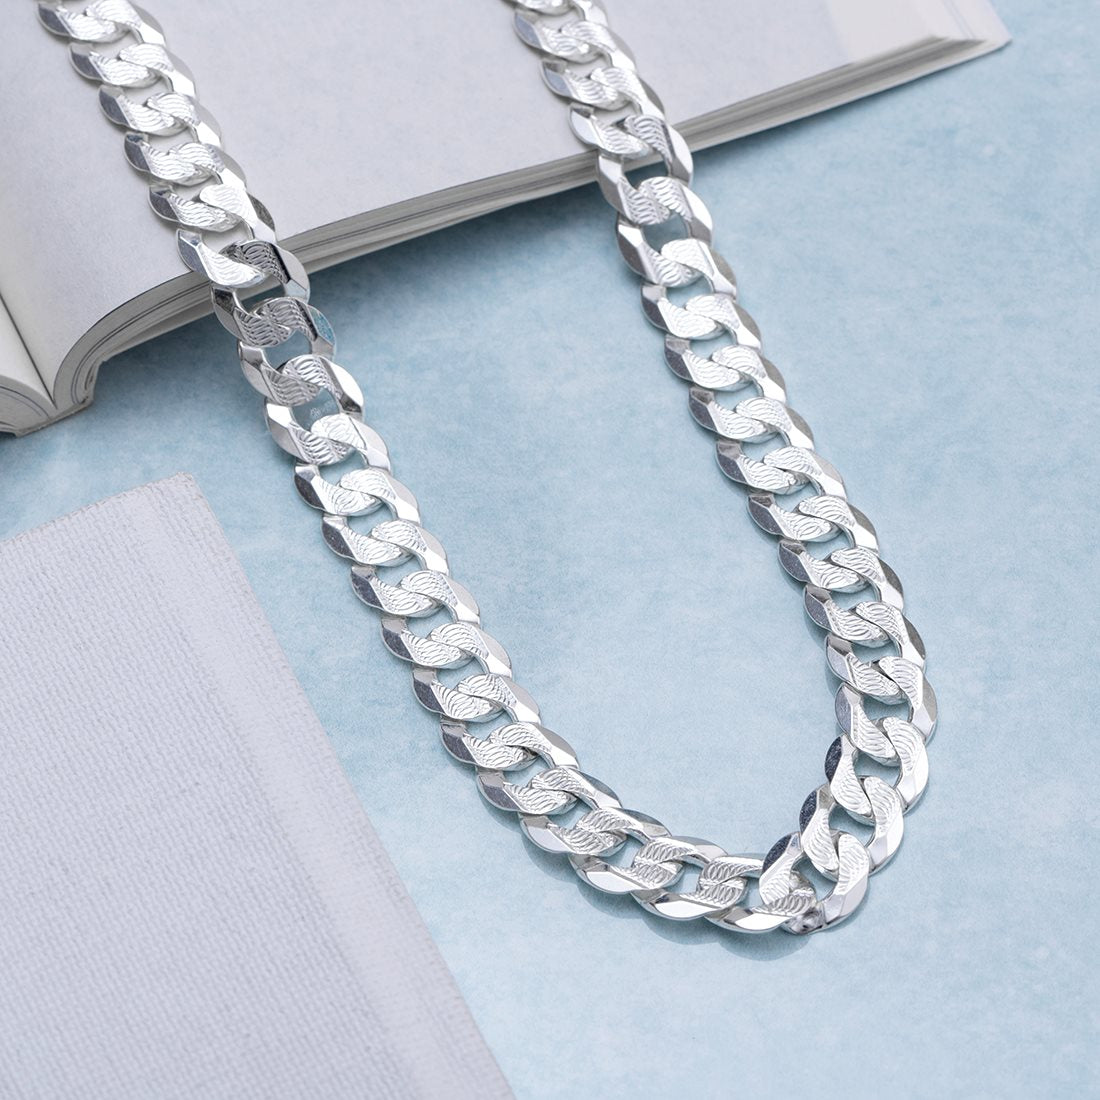 Sleek Rhodium-Plated Linked Chain 925 Sterling Silver Men's Chain